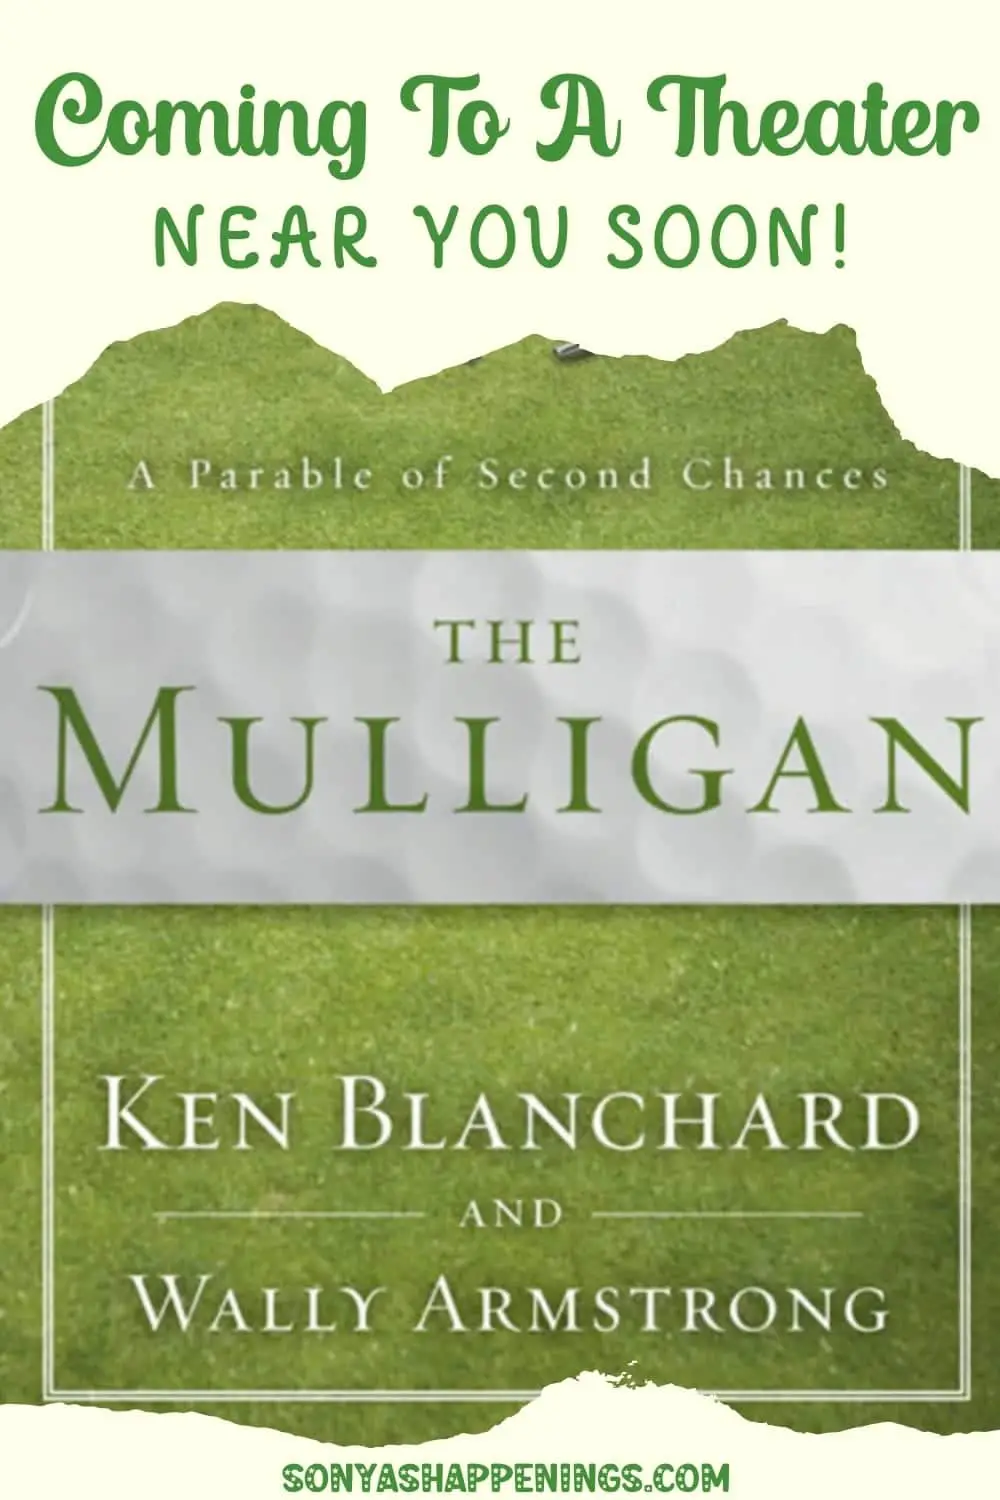 The Mulligan Book PLUS It\'s Movie Will Be Coming Soon To A Theater Near You!